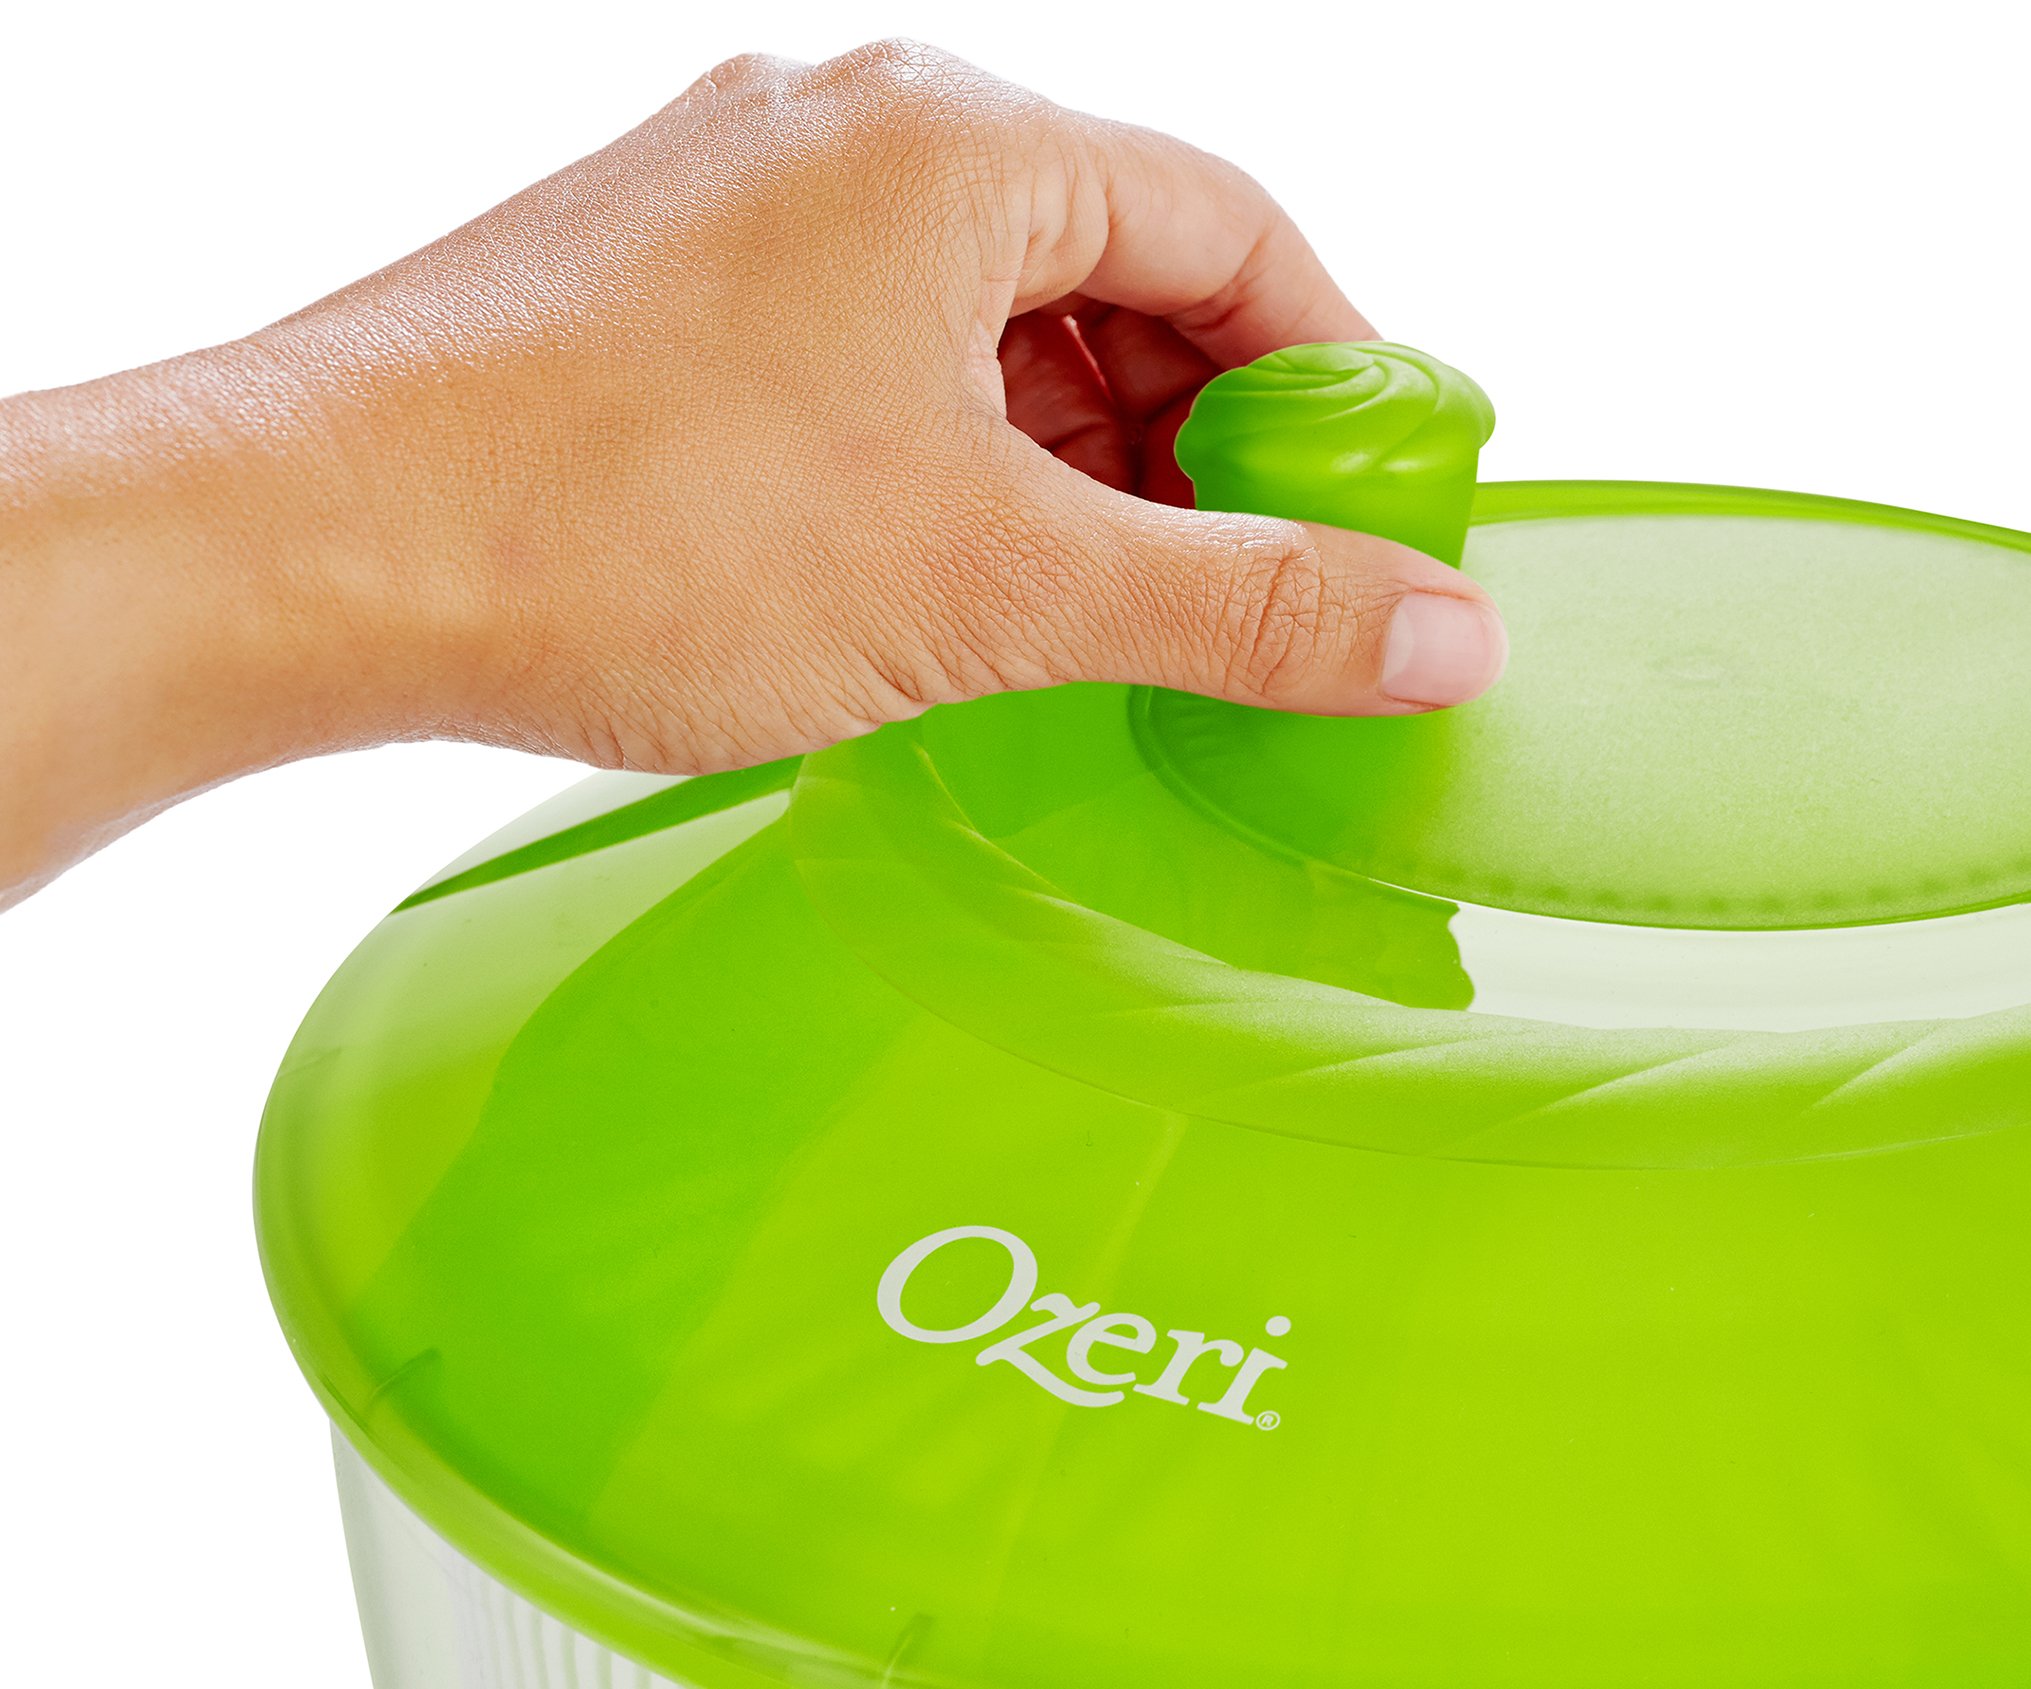 Ozeri Italian Made Fresca Salad Spinner and Serving Bowl, BPA-Free, Green, 4.4 qt